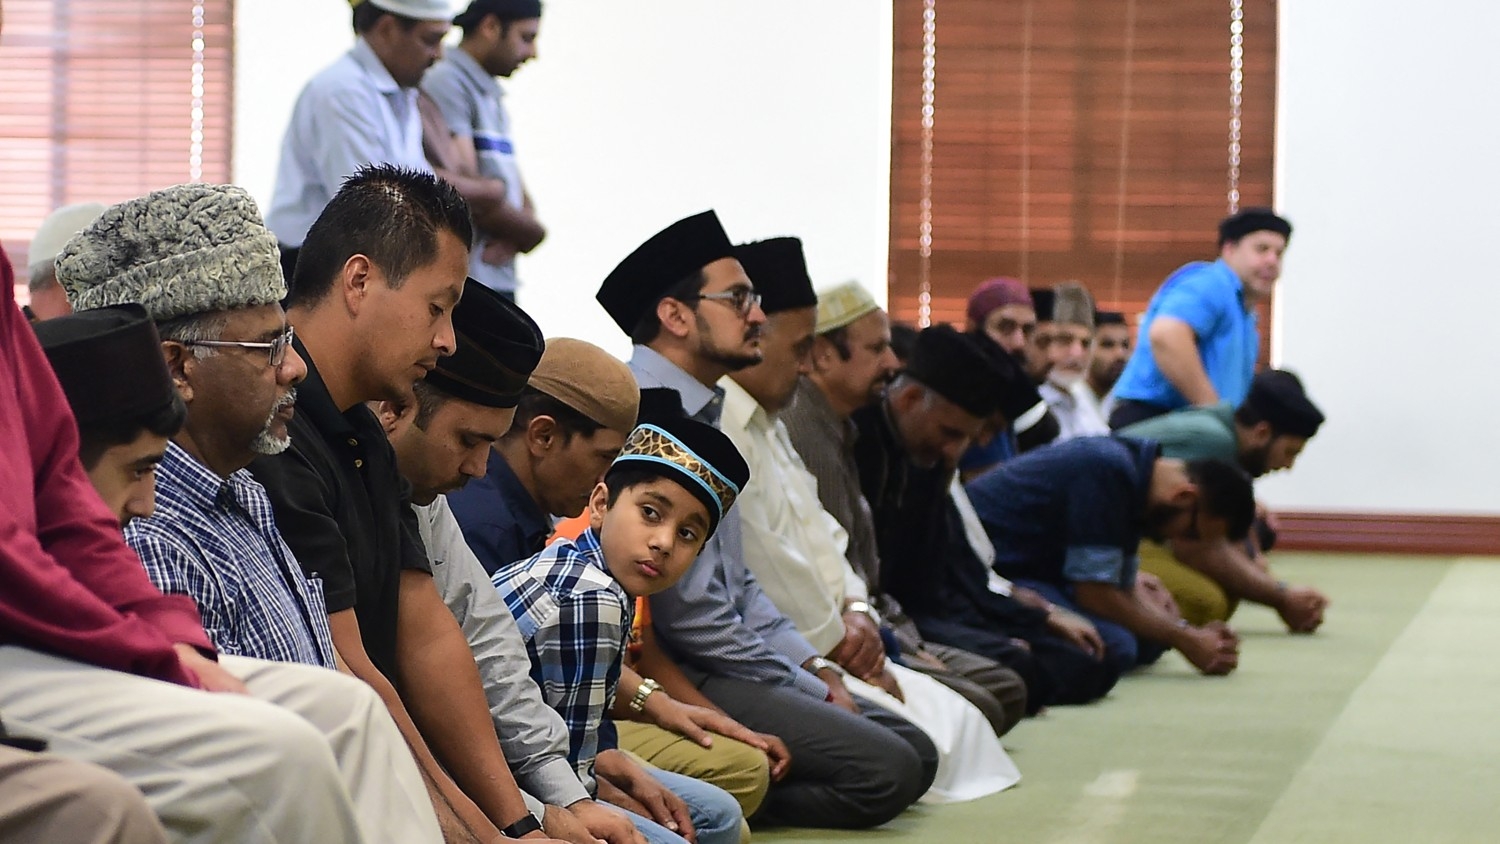 Muslims pray during closing prayers for Ramadan at the Baitul Hameed Mosque in Chino, California on 5 July 2016.